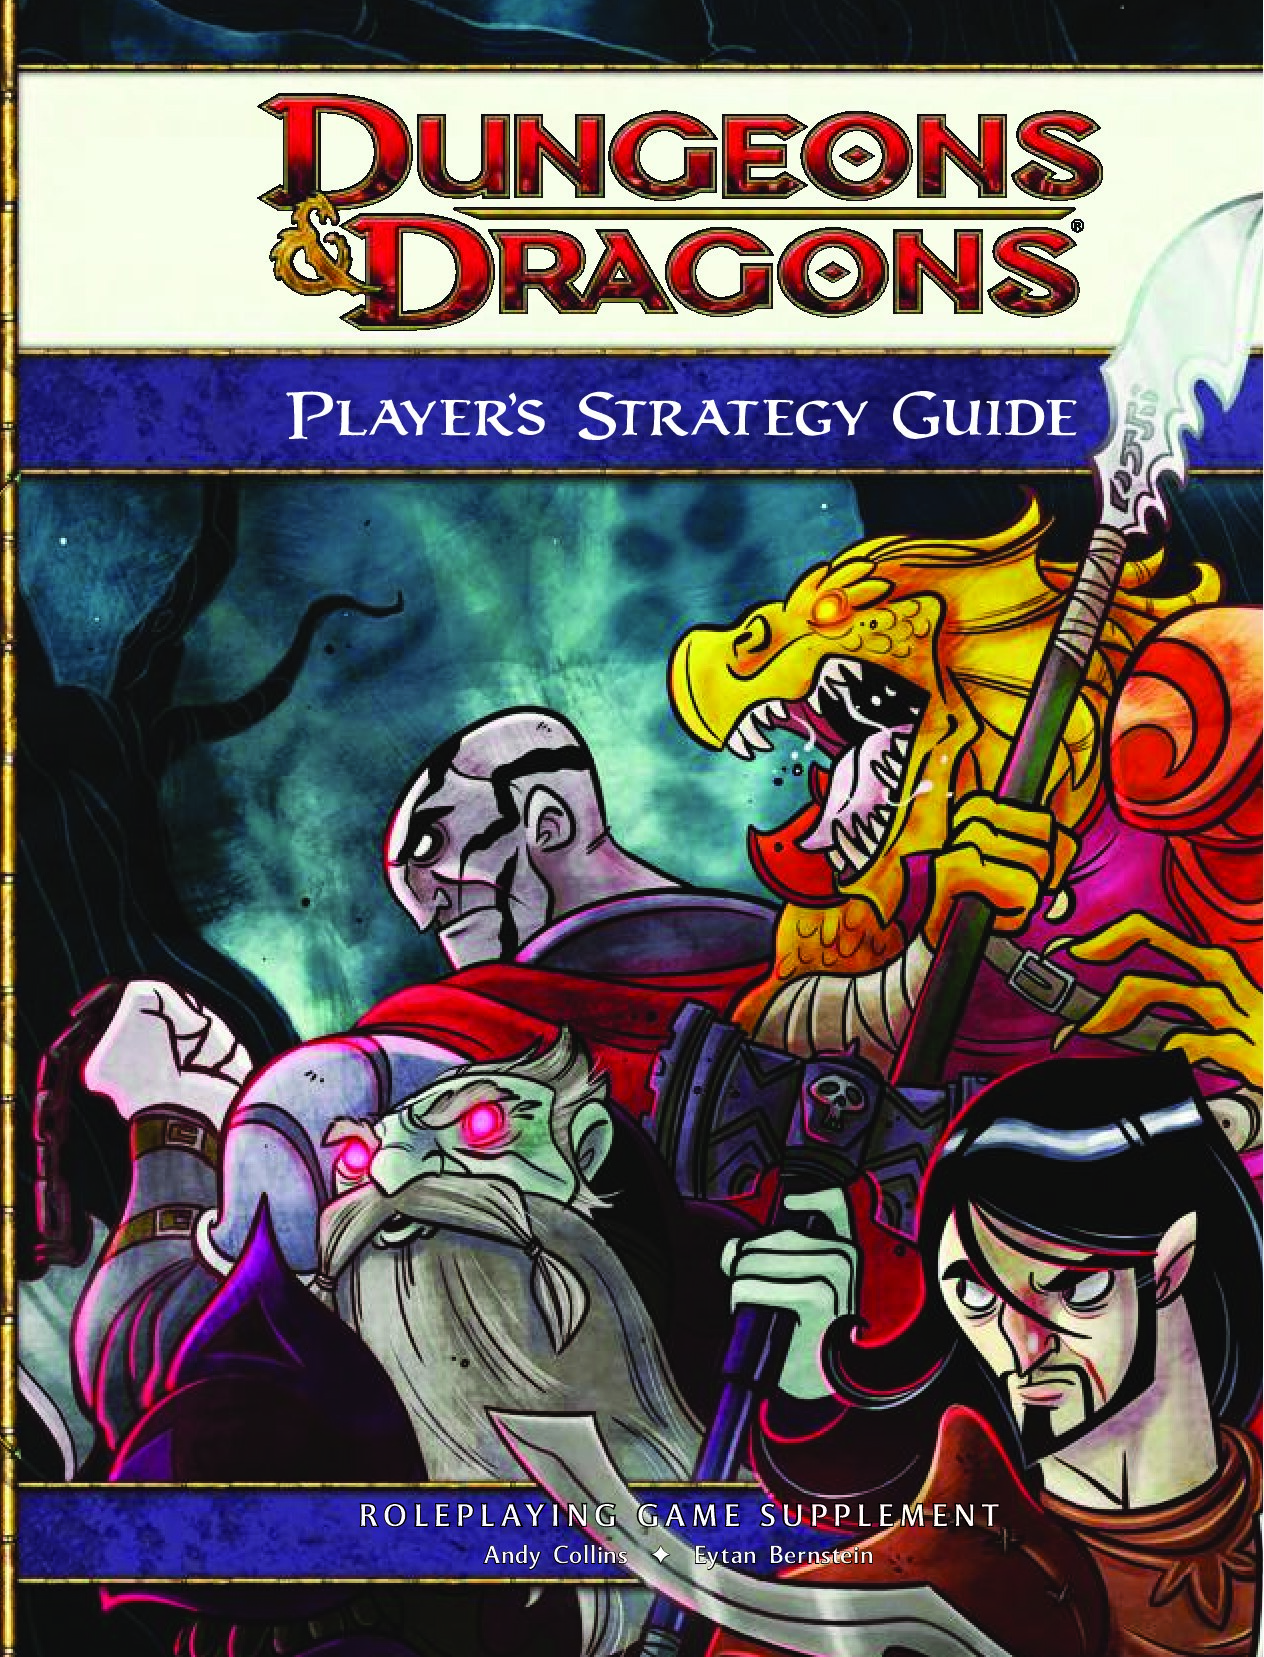 Players Strategy Guide